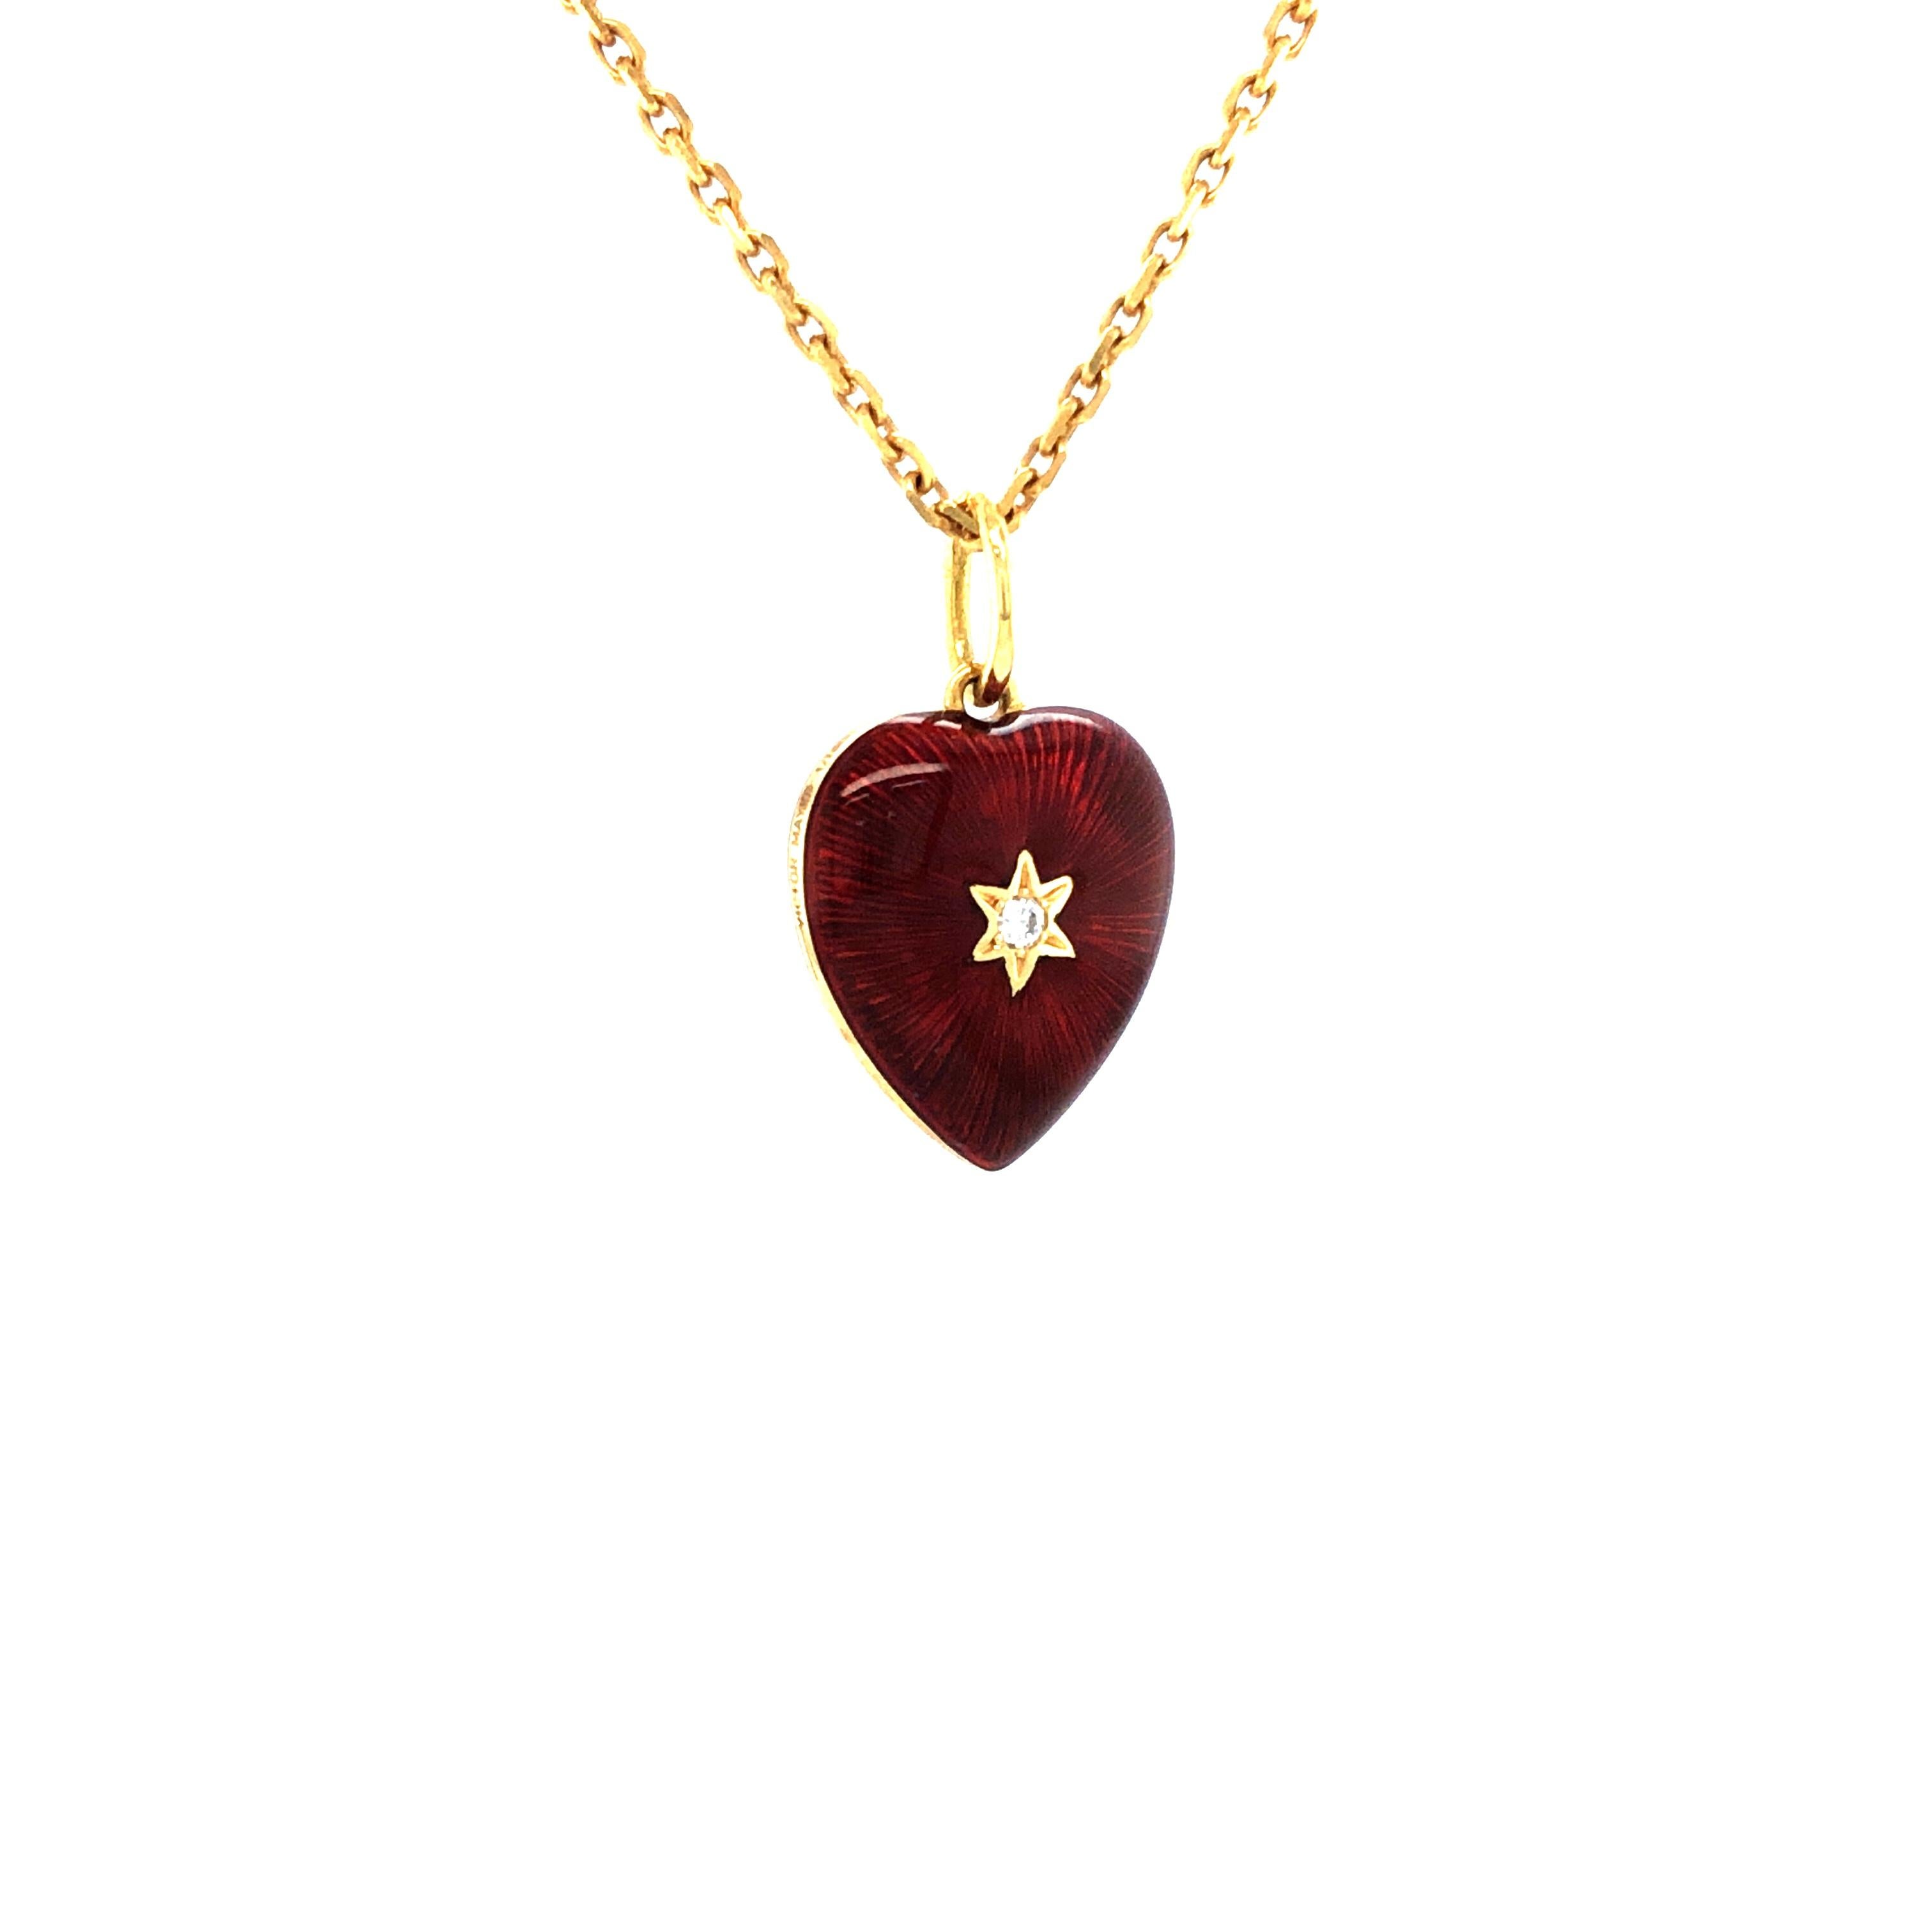 Women's Heart Pendant with Star, 18k Yellow Gold, Red Enamel 2 Diamonds 0.03 Ct G VS For Sale